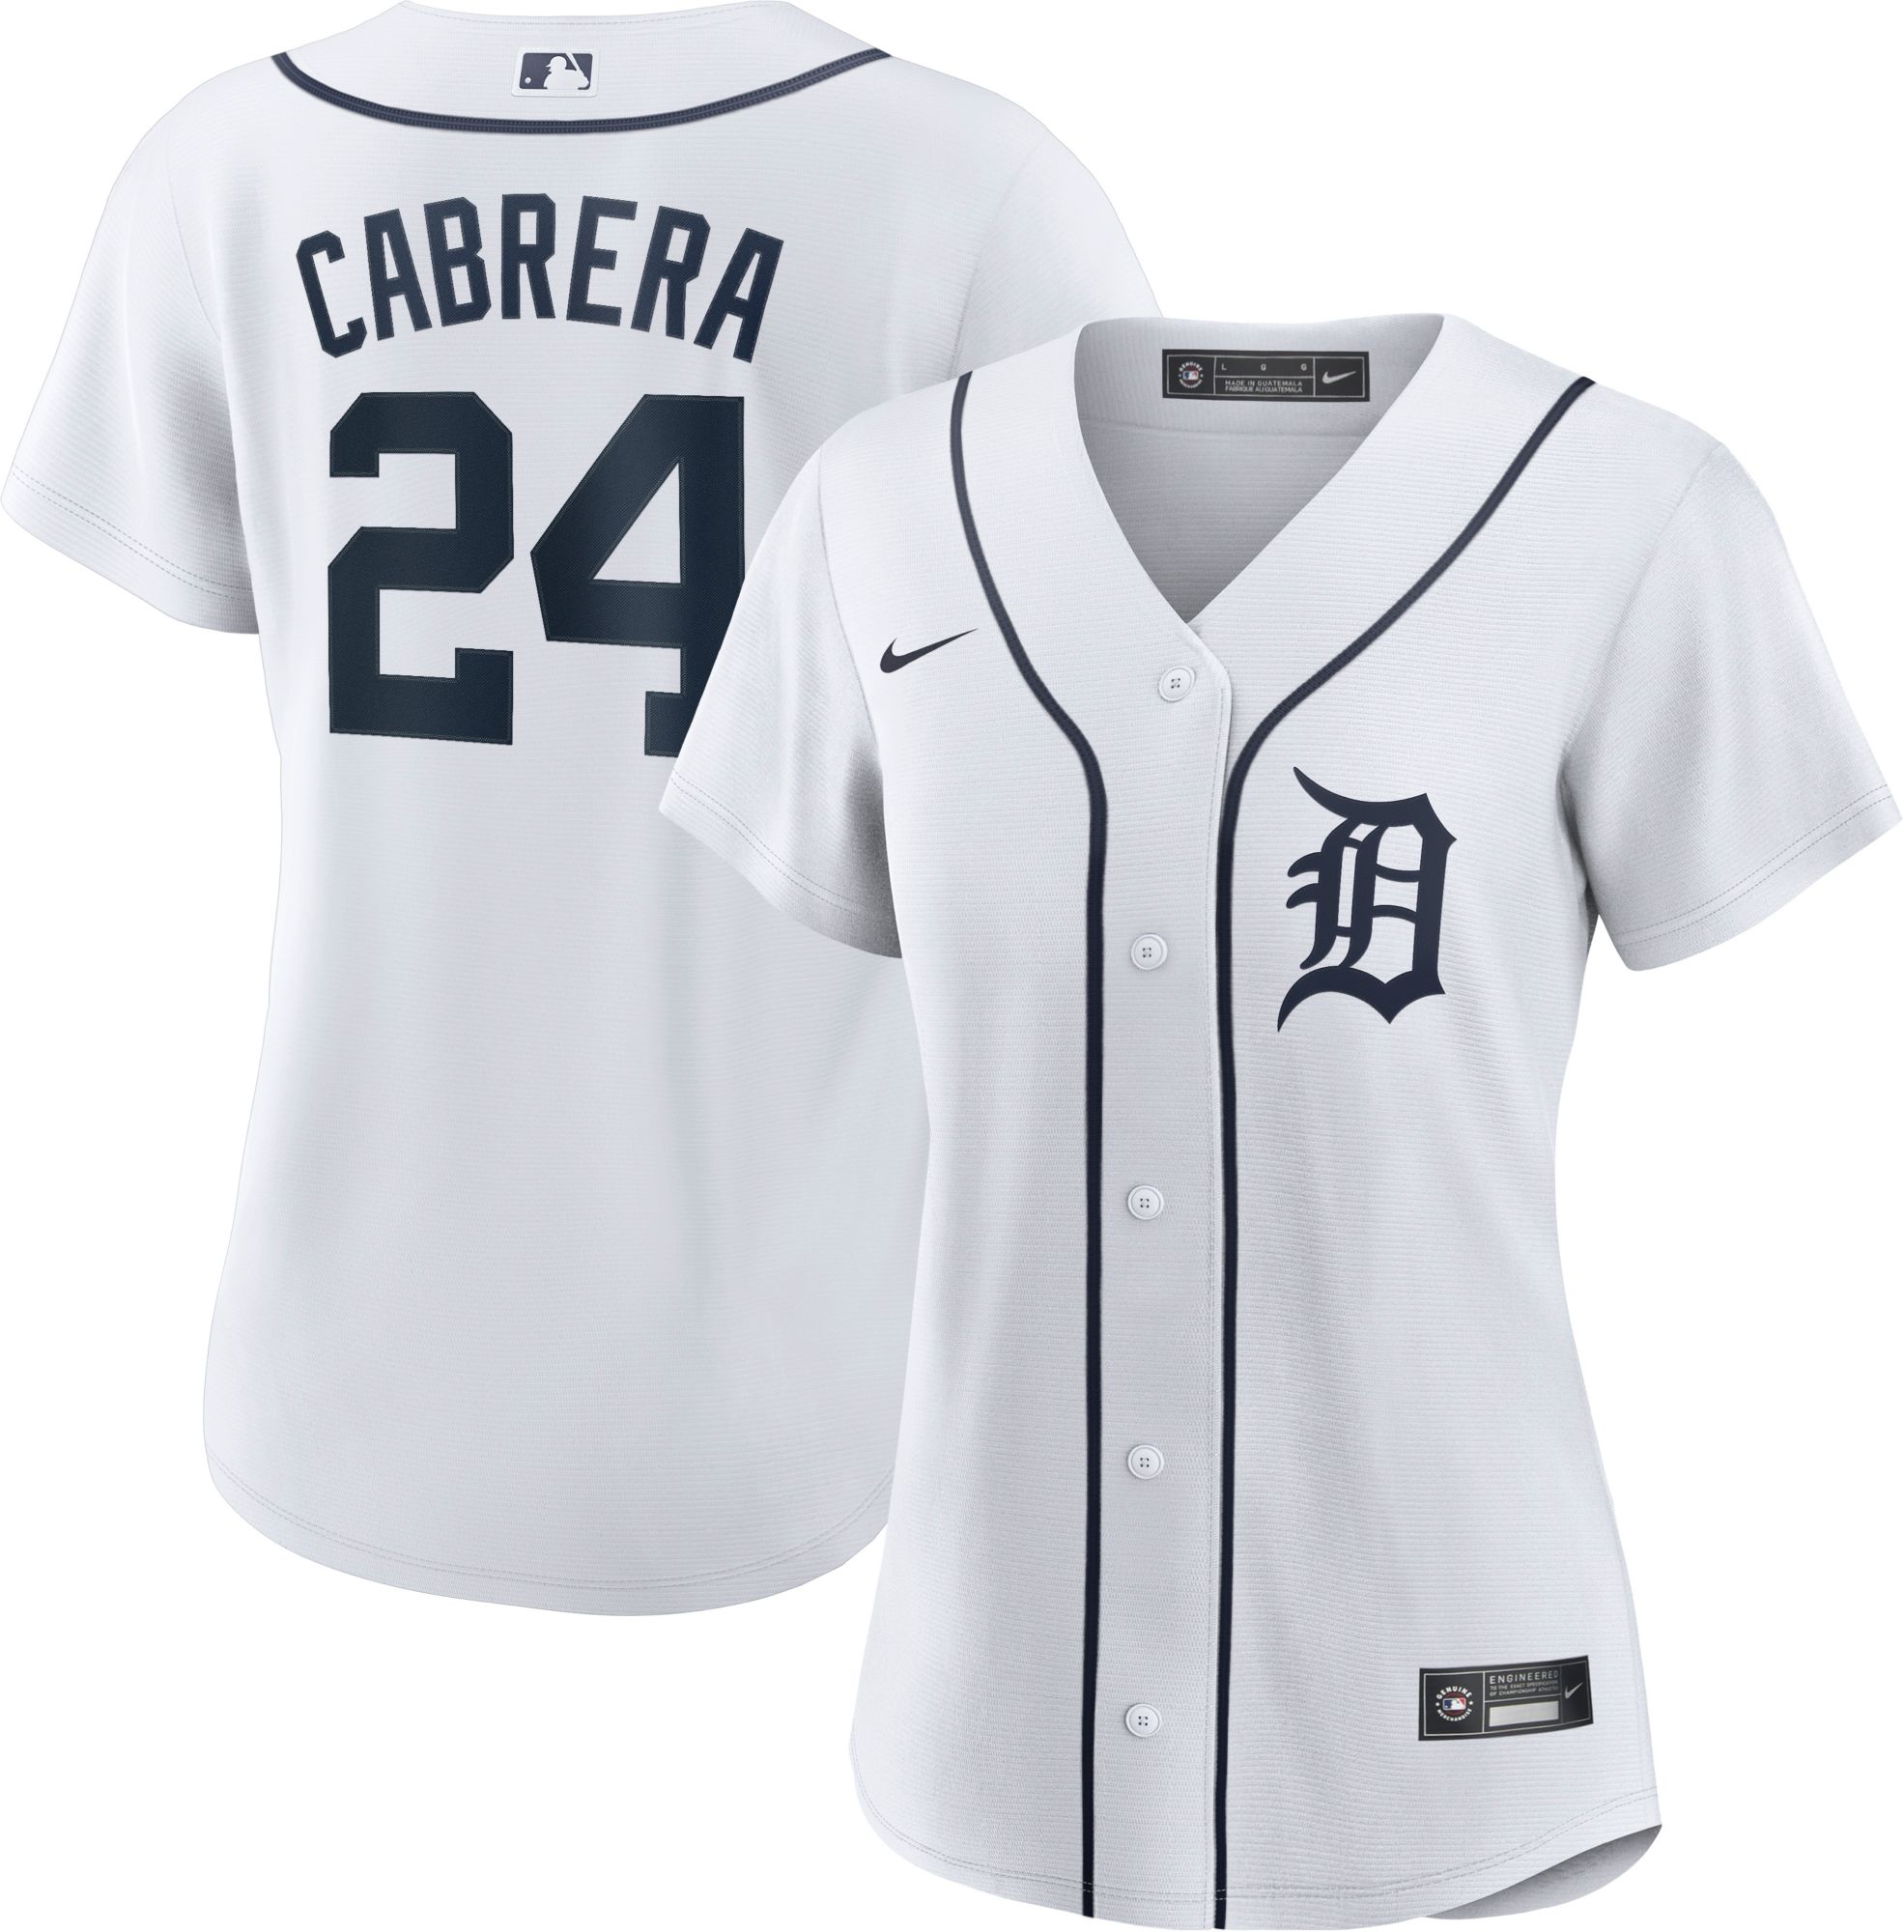 Cabrera #24 Detroit Tigers Men's Nike Road Replica Jersey by Vintage Detroit Collection